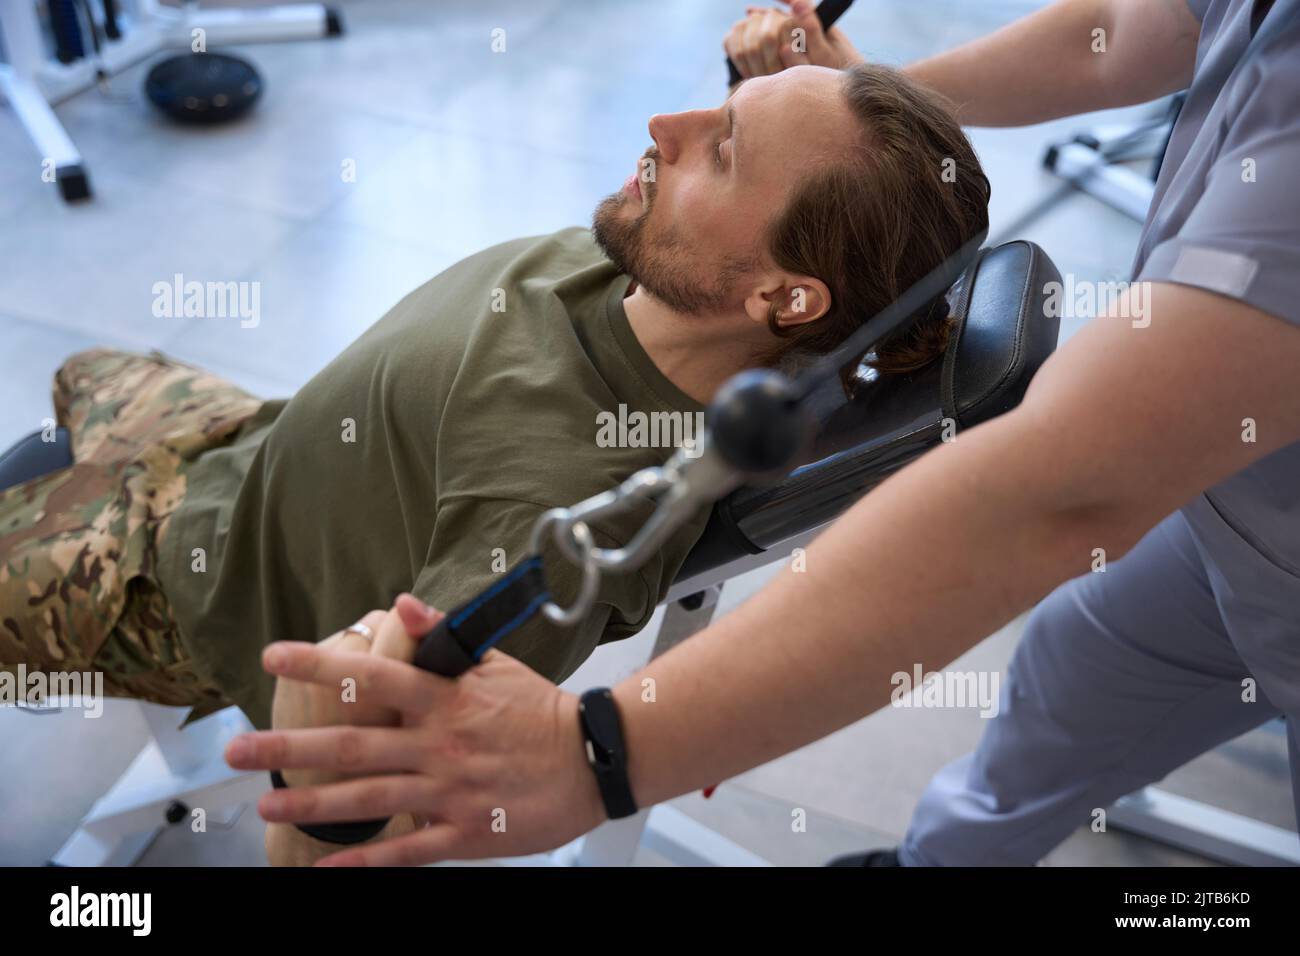 Soldier after being wounded is engaged in simulator with doctor Stock Photo